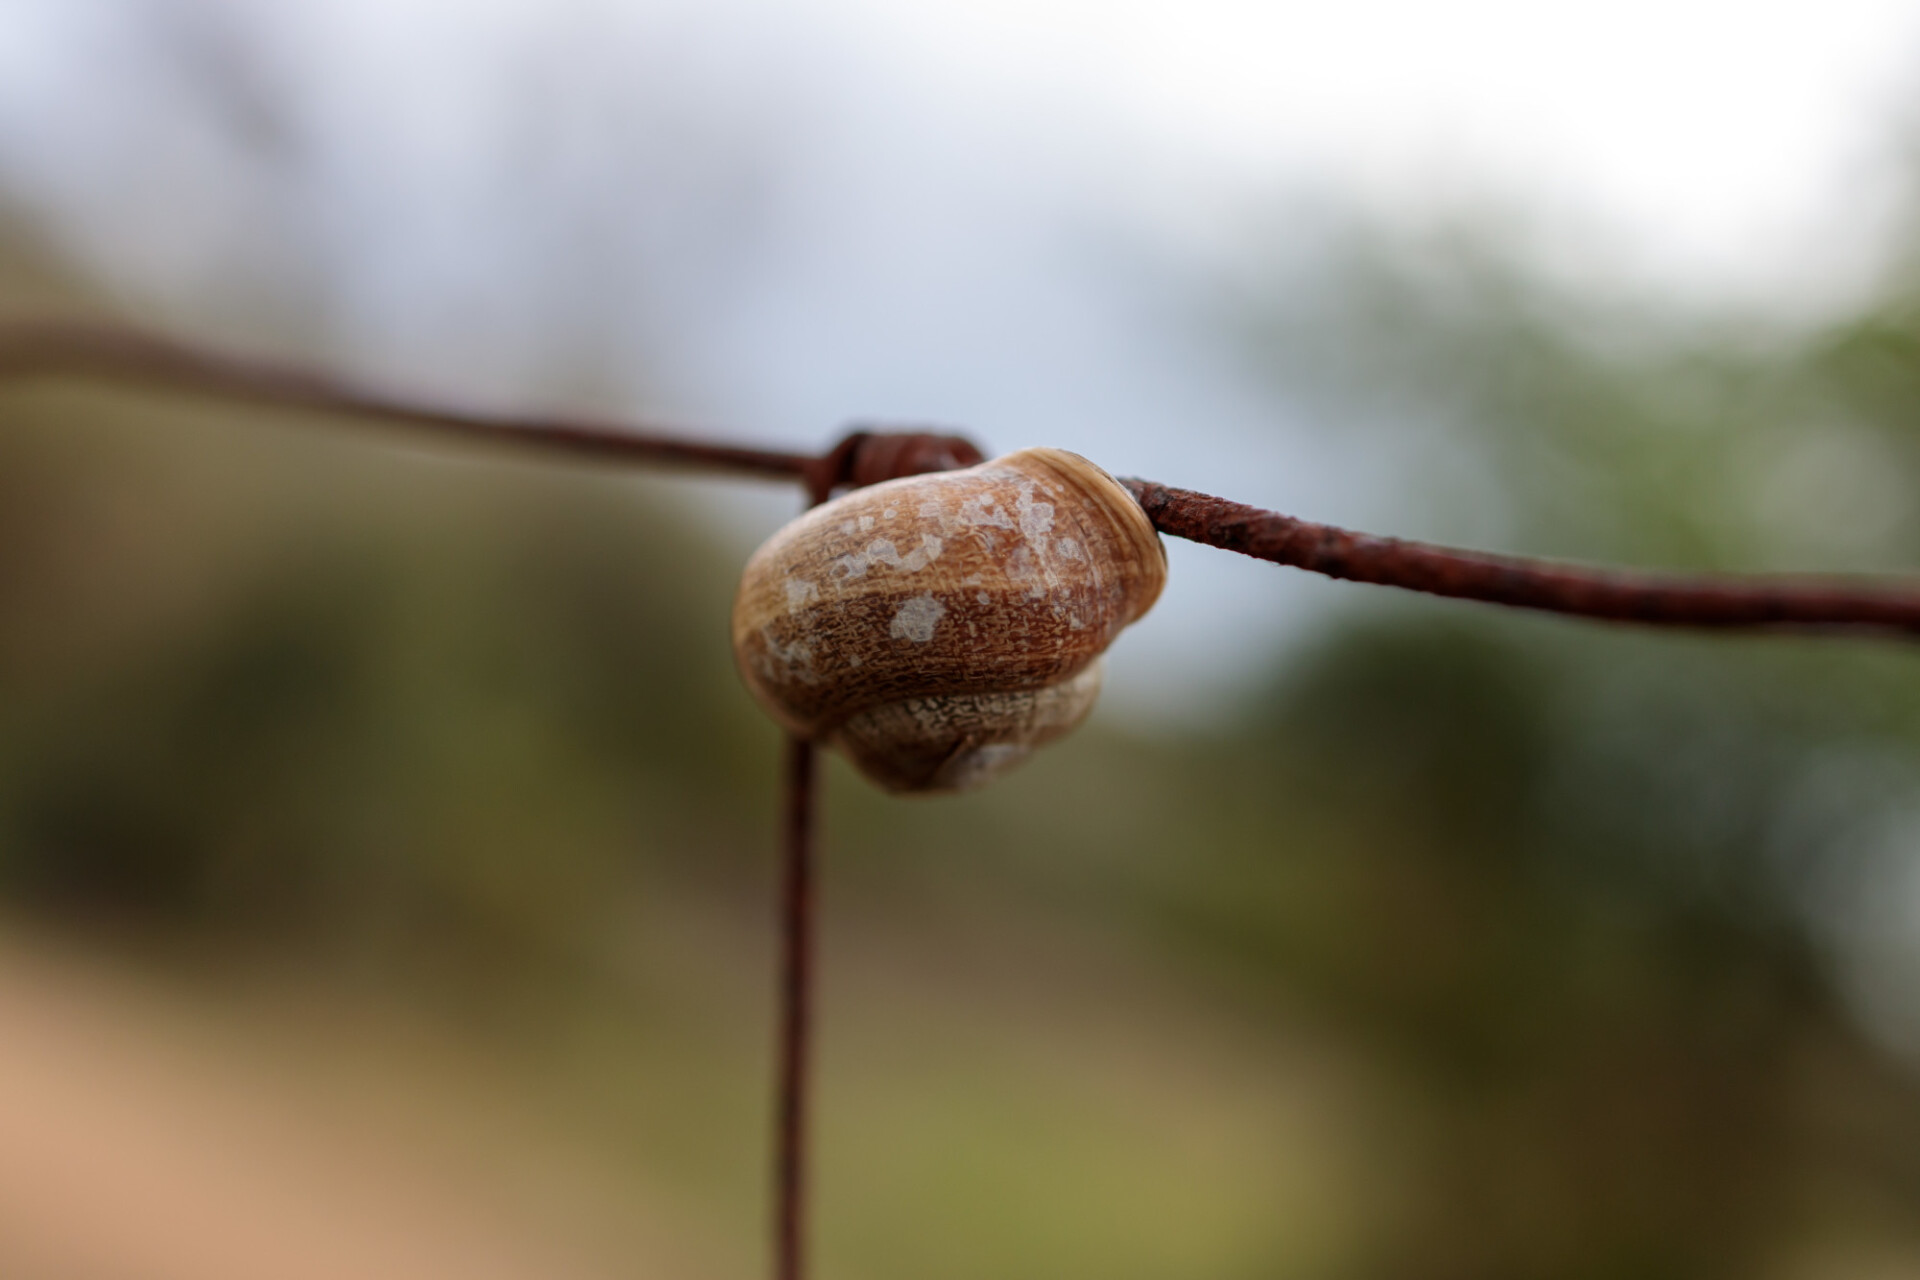 Snail on a rusty wire fence